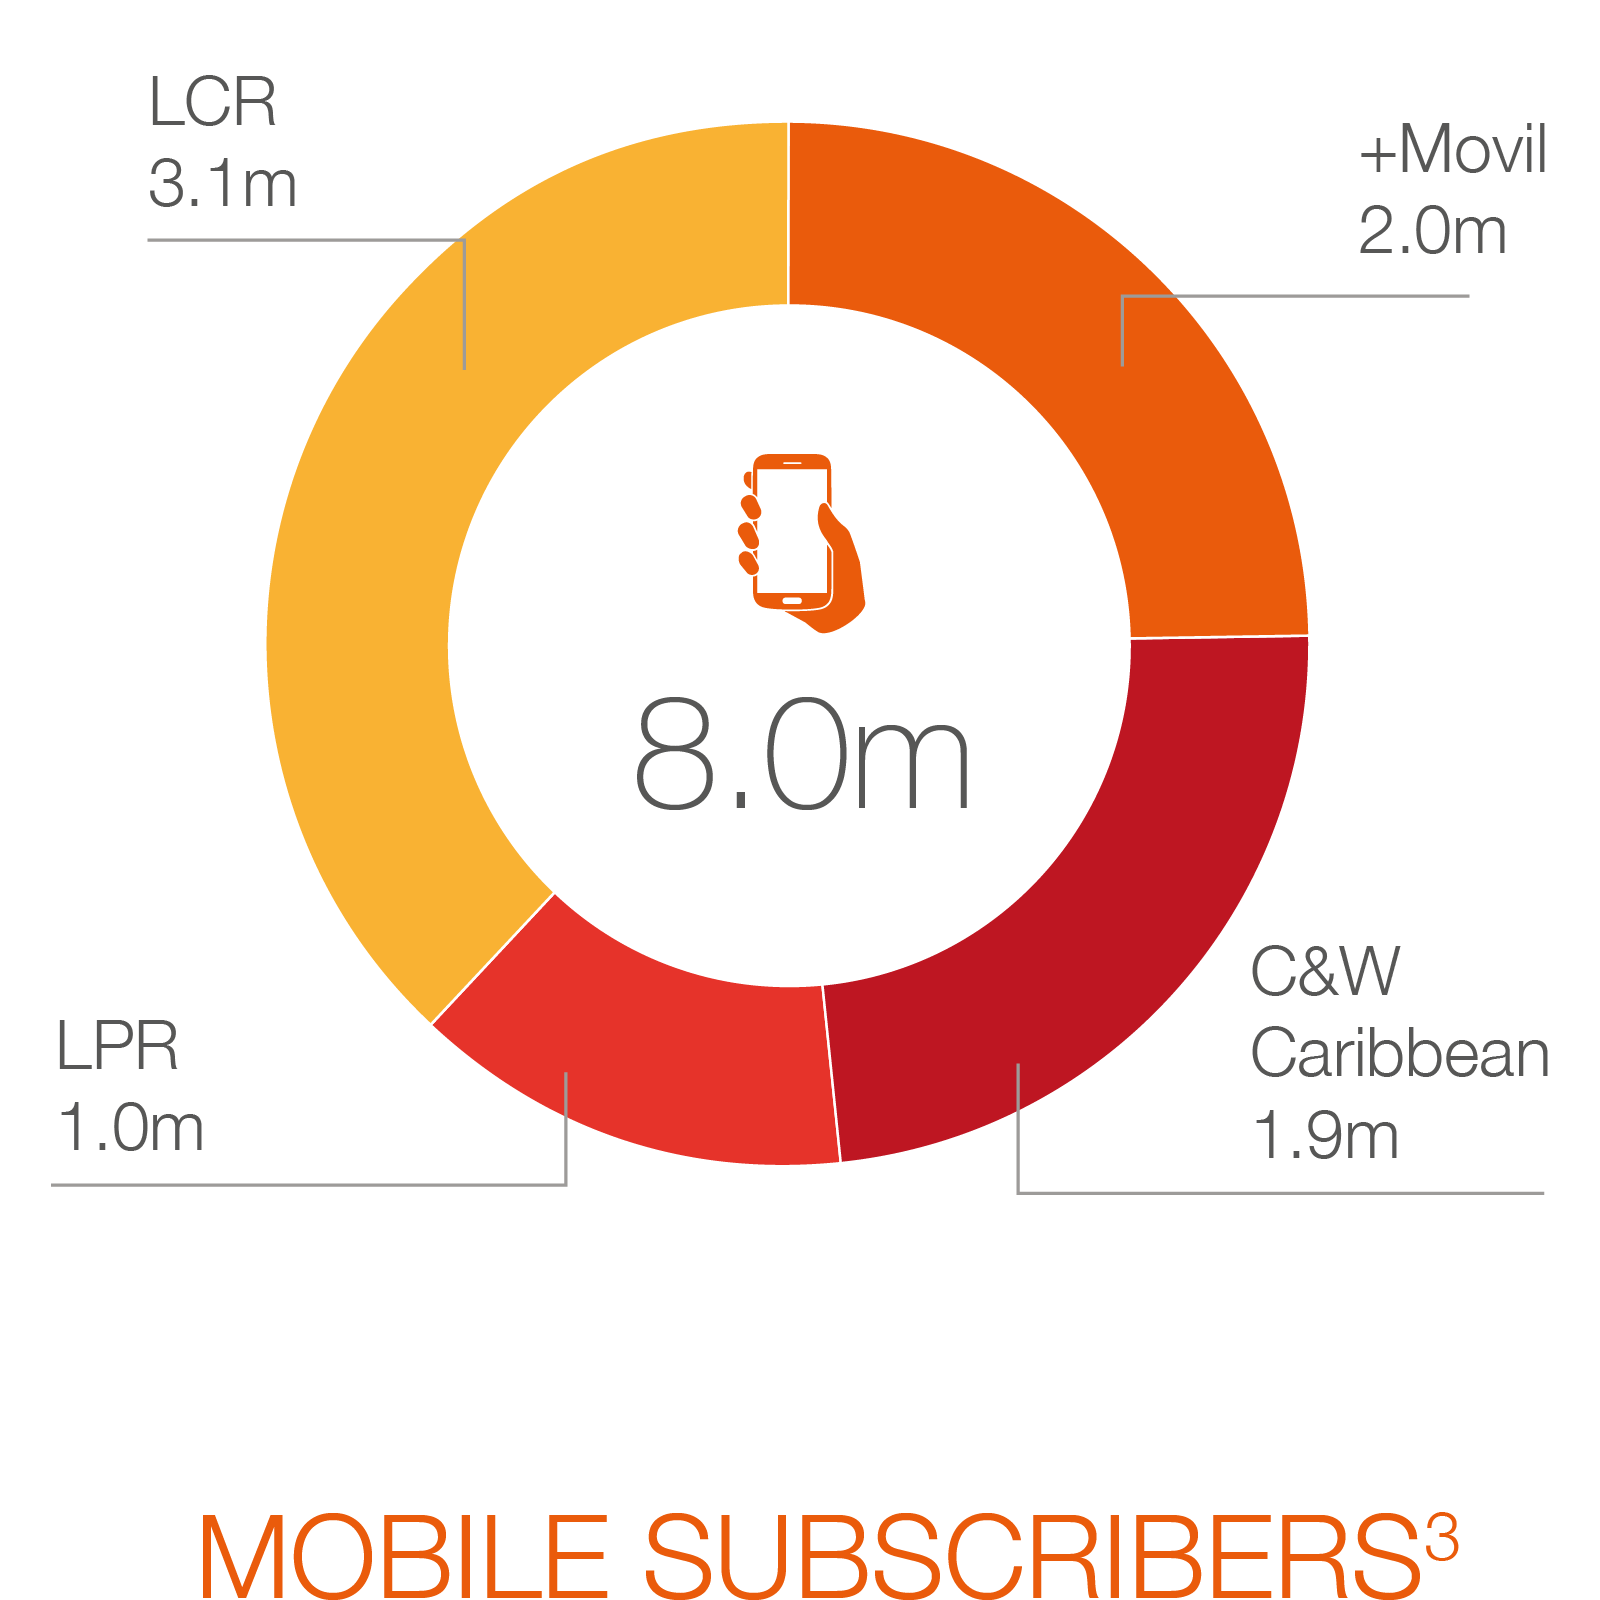 MOBILE SUBSCRIBERS